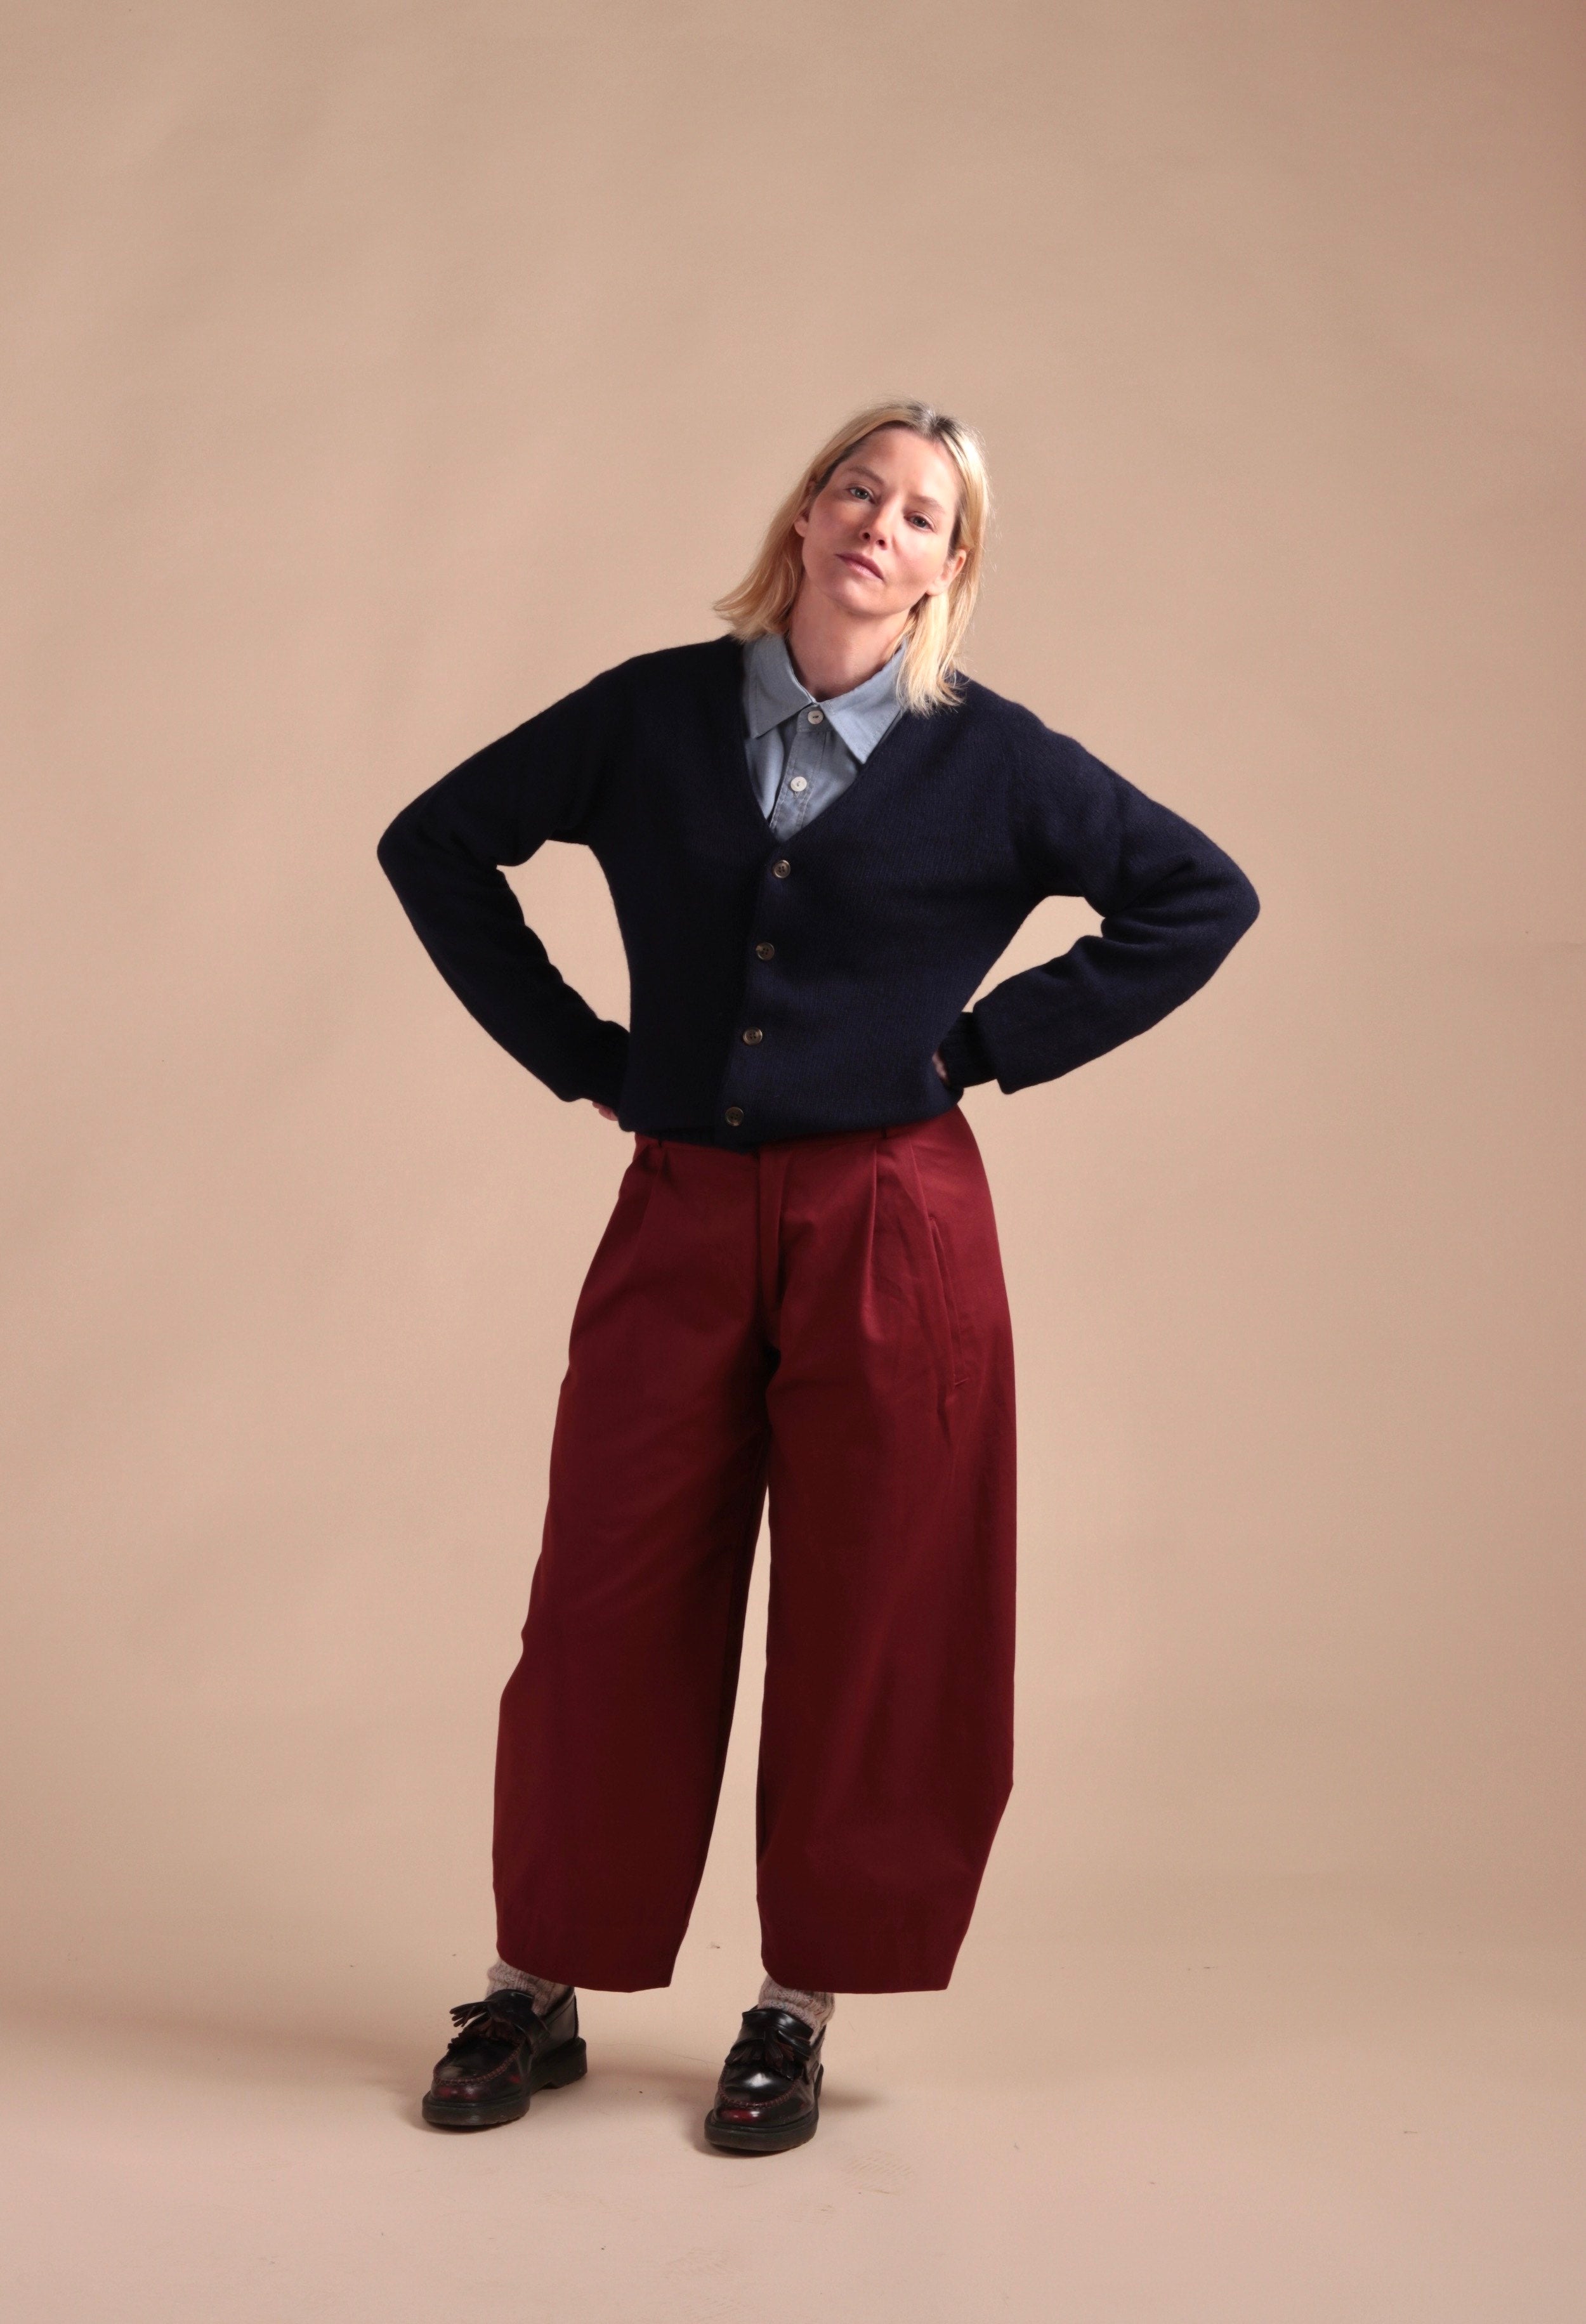 Sienna wears Carrier Company Dutch Trouser in Breton red with Navy Cardigan